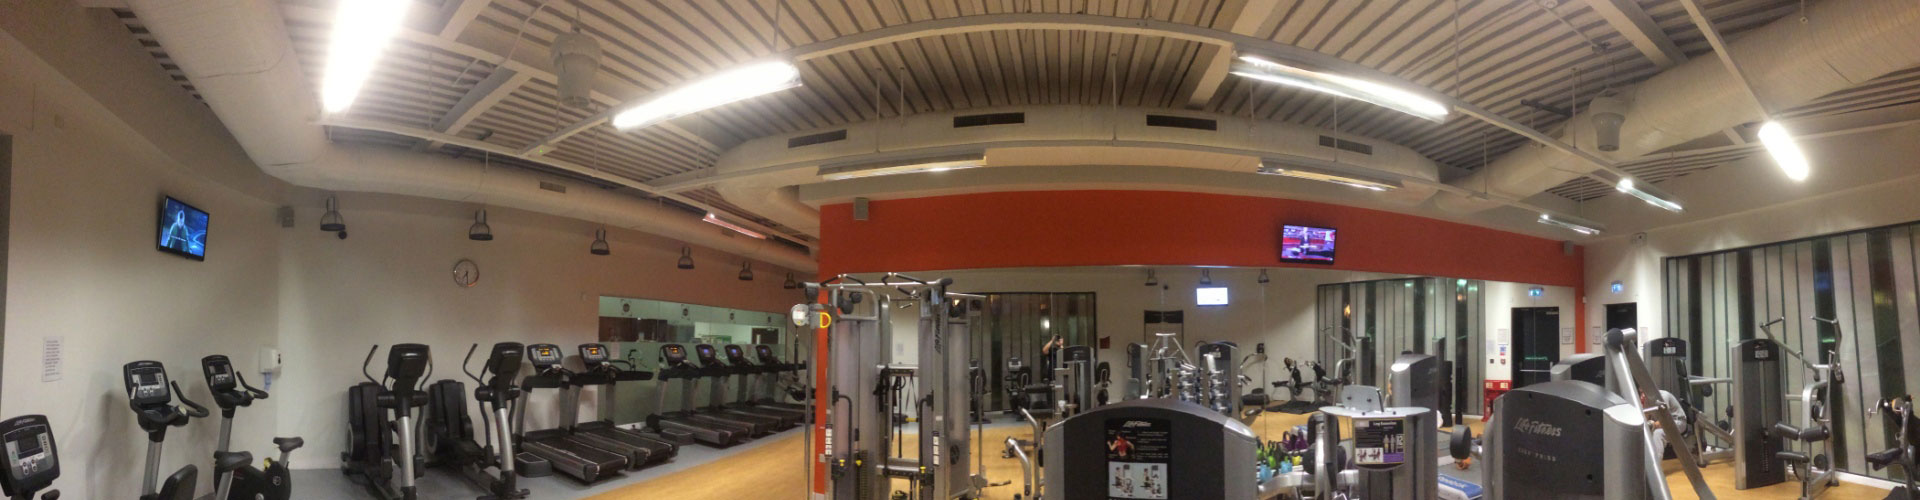 Airius Destratification Fan Installations in Sports and Leisure Buildings - Banner 6